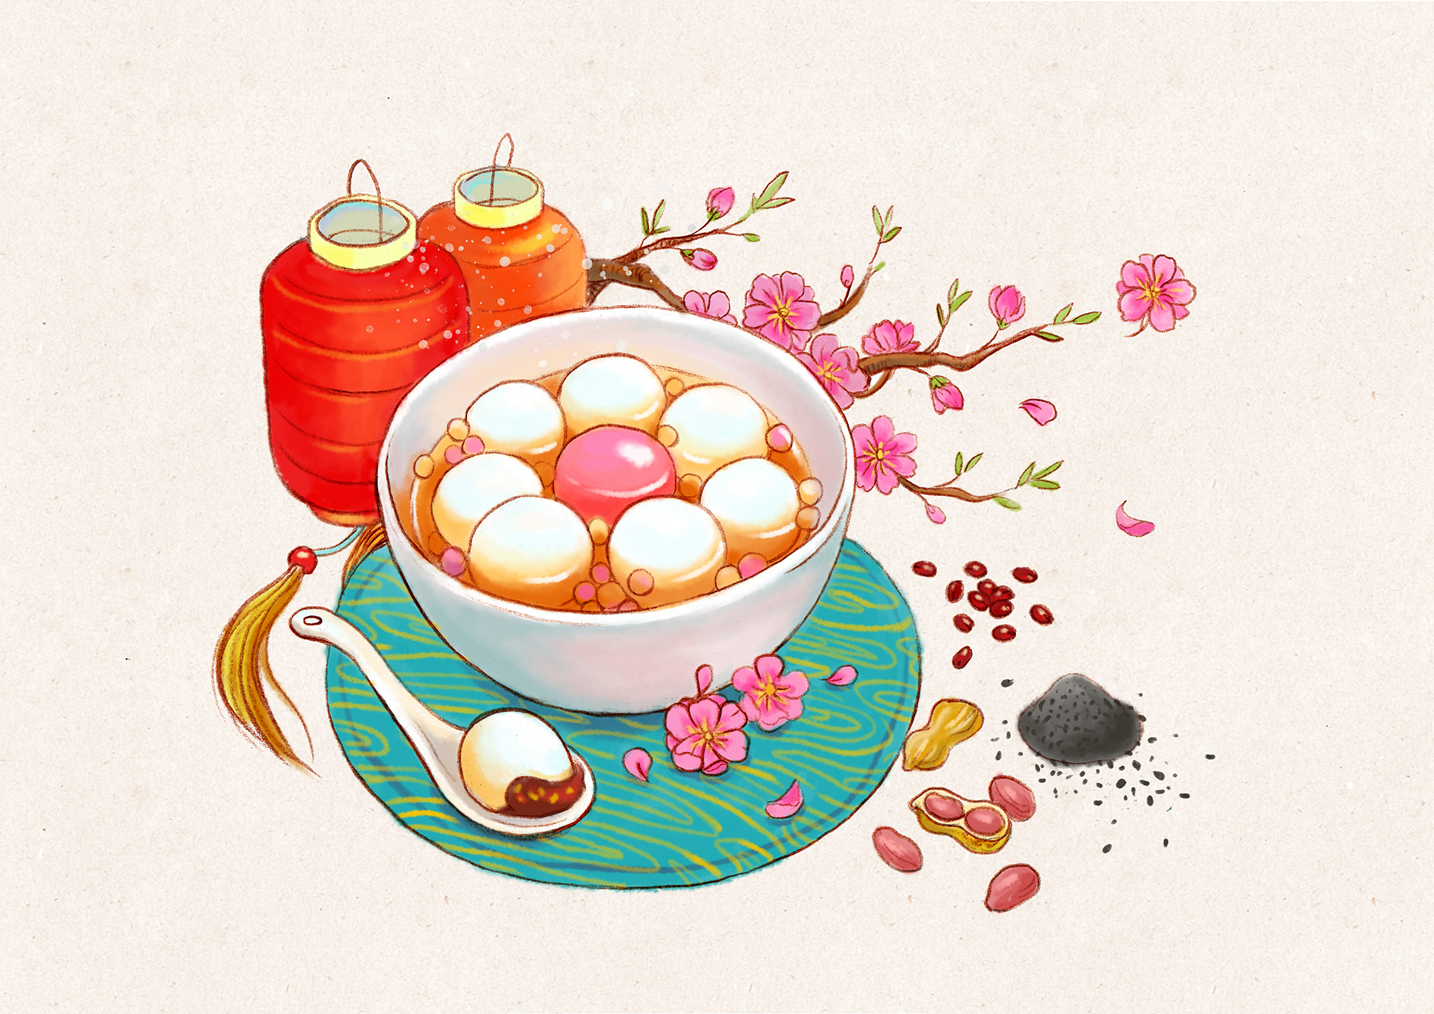 Delicious, auspicious Lantern Festival foods to try from around China